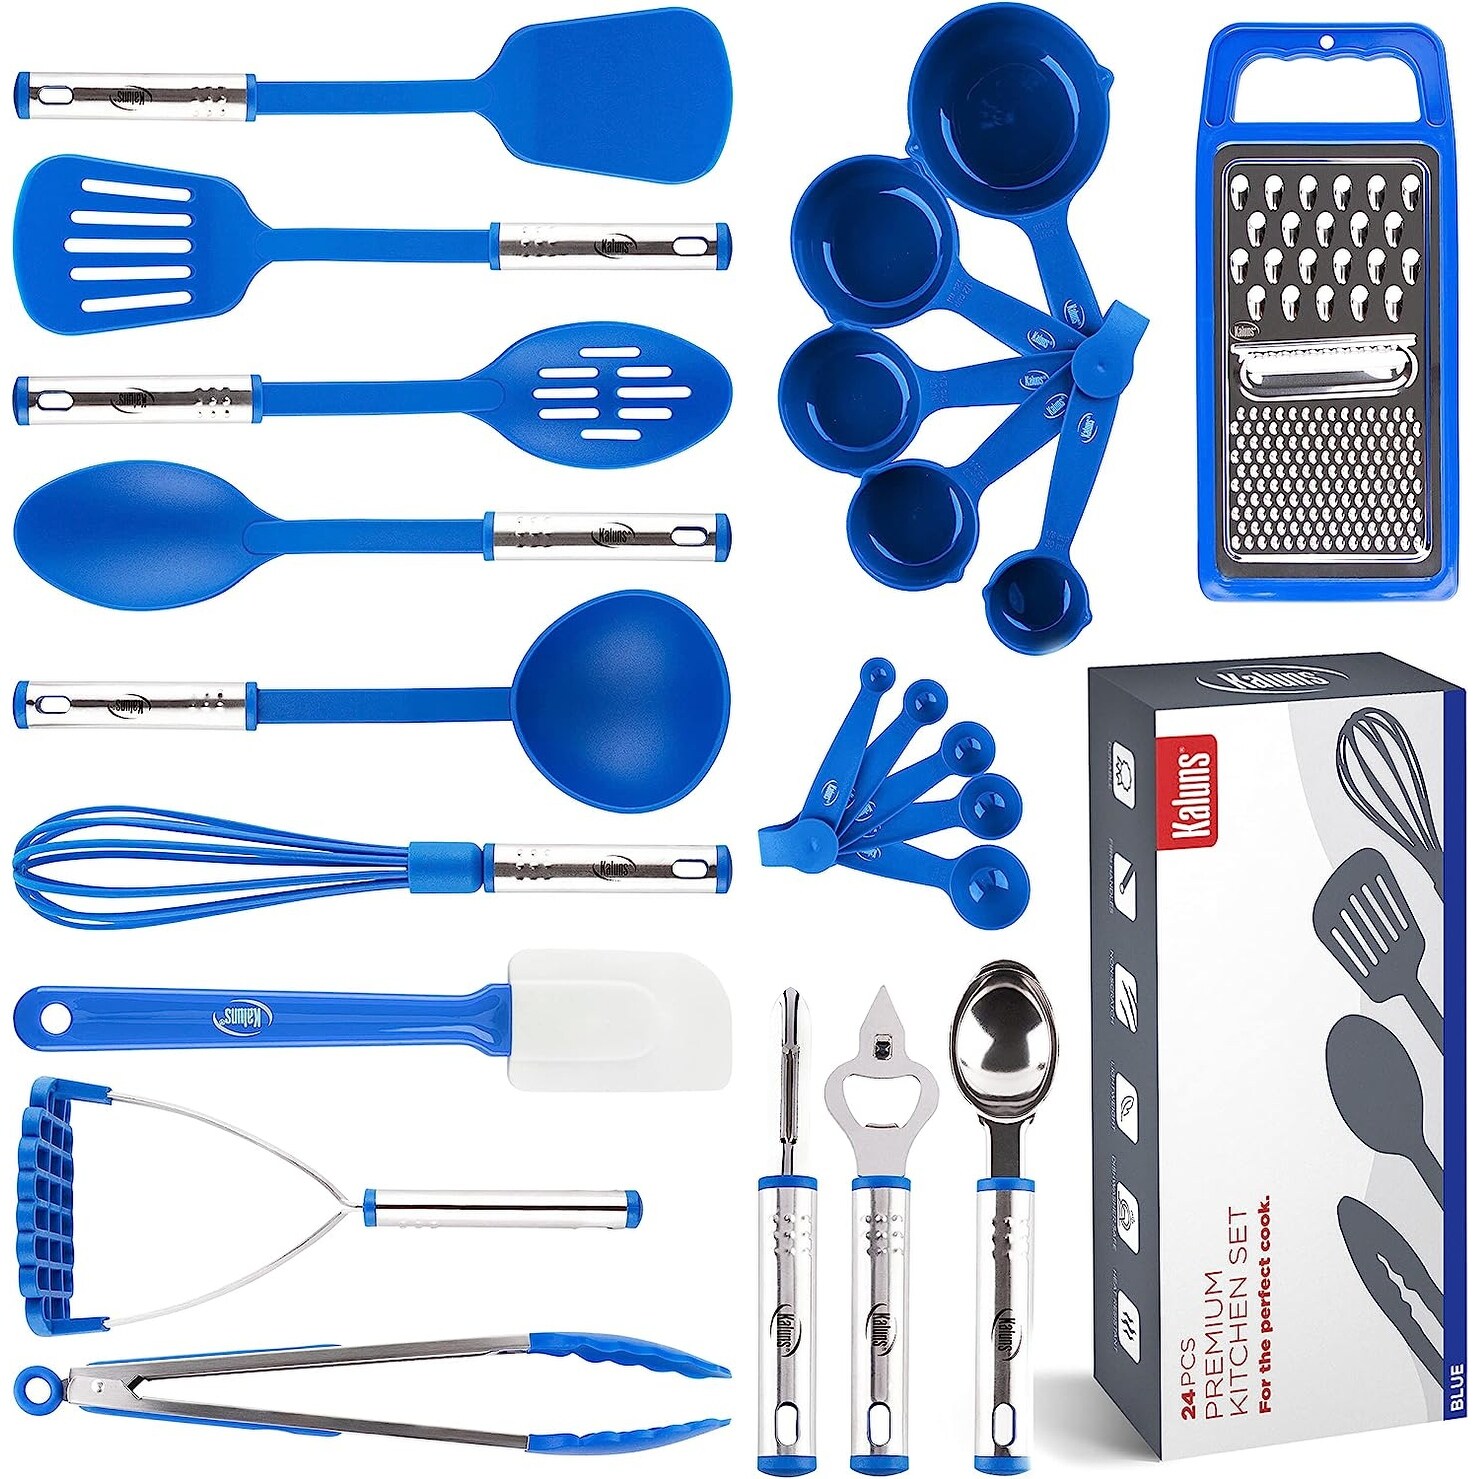 Blue Kitchen Utensil Set - Stainless Steel & Silicone Heat Resistant Professional Cooking Tools